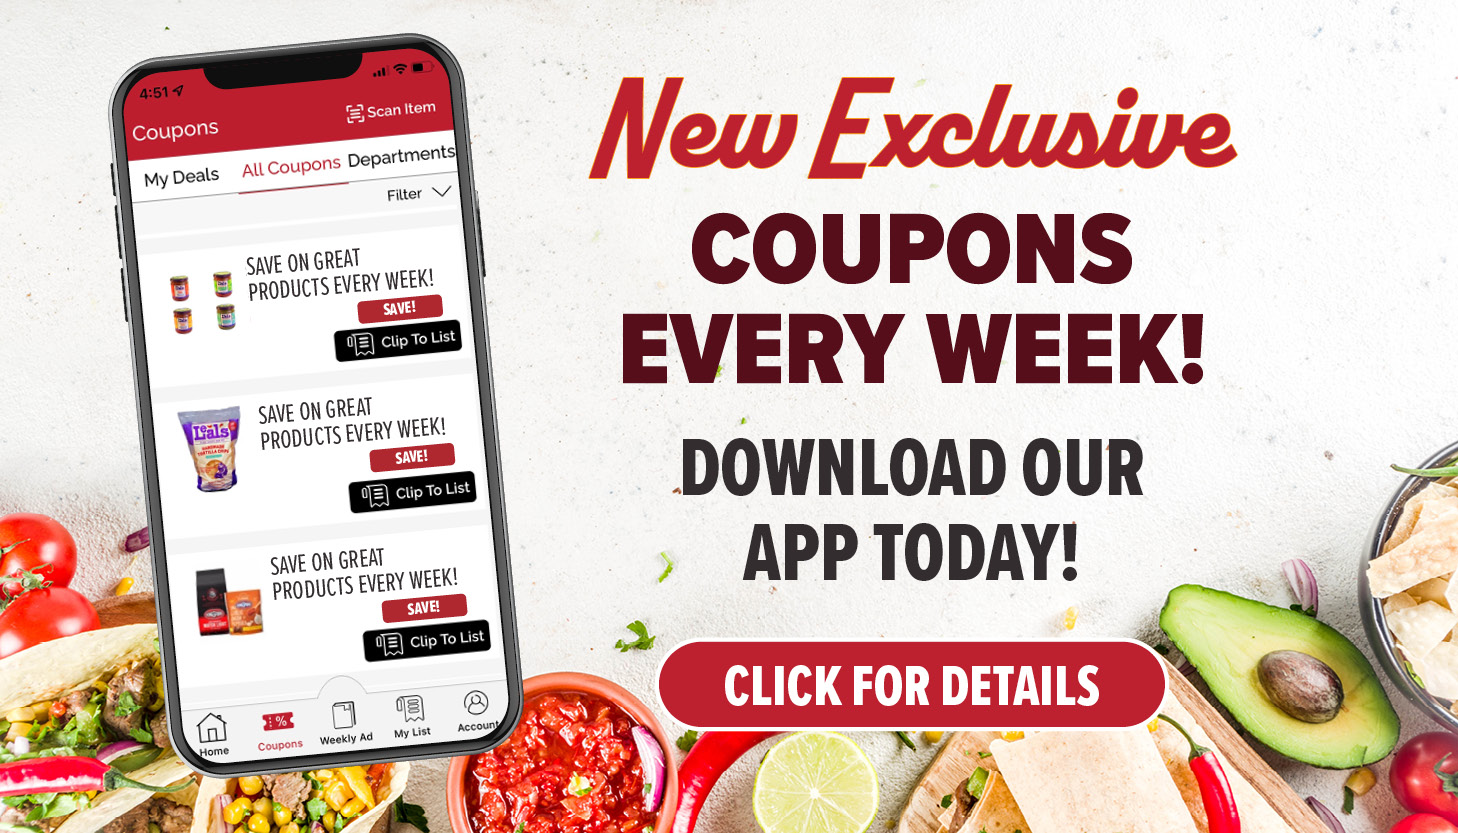 New Exclusive Coupons Every Week